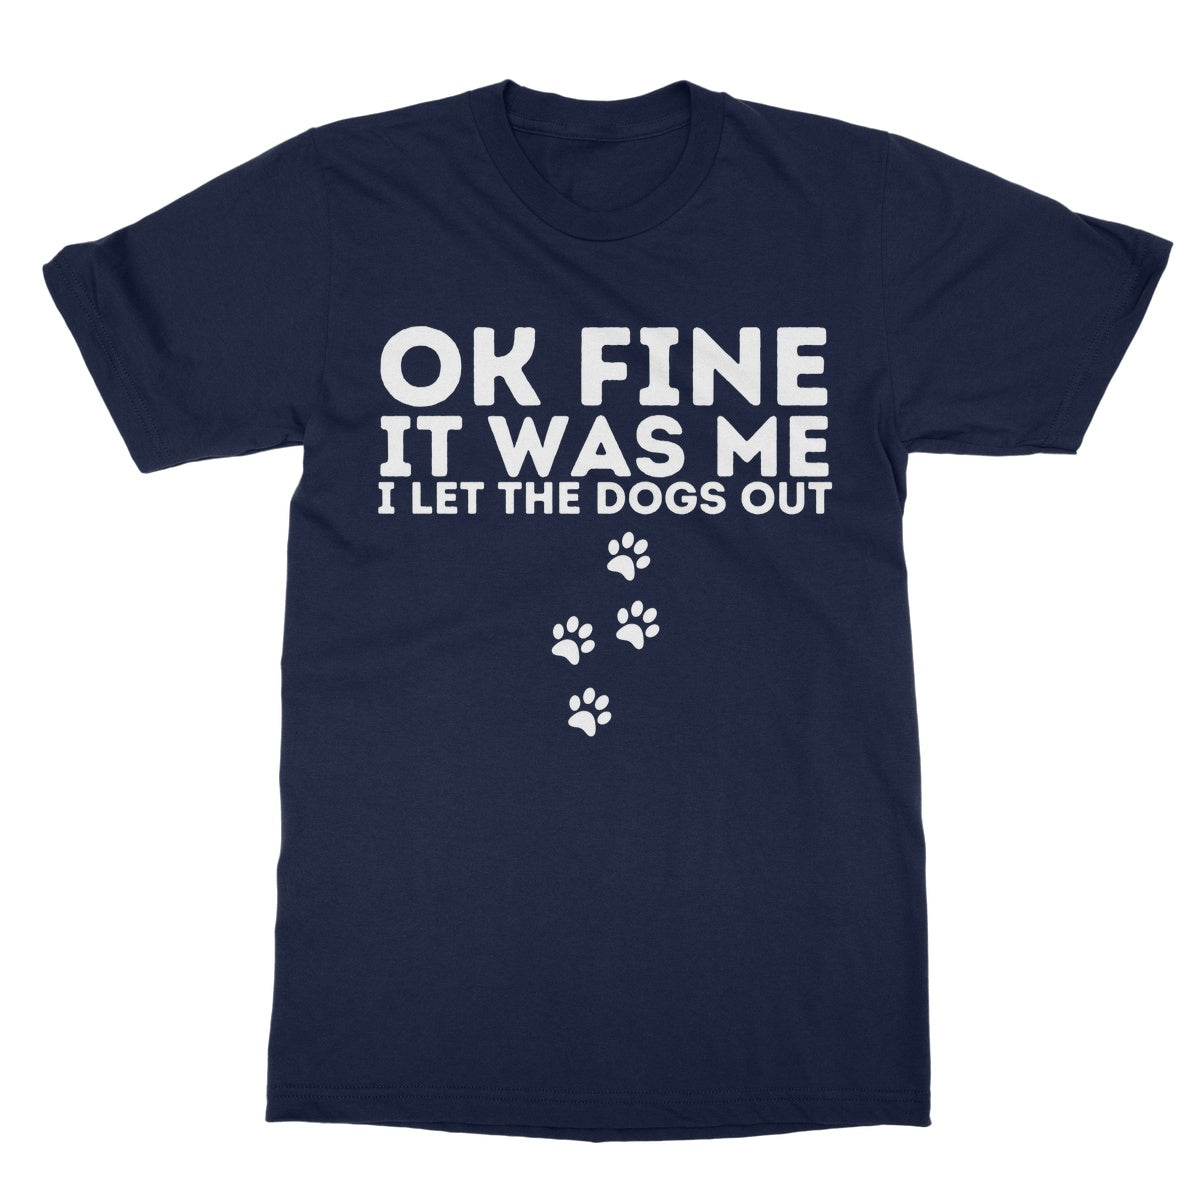 I let the dogs out t shirt navy